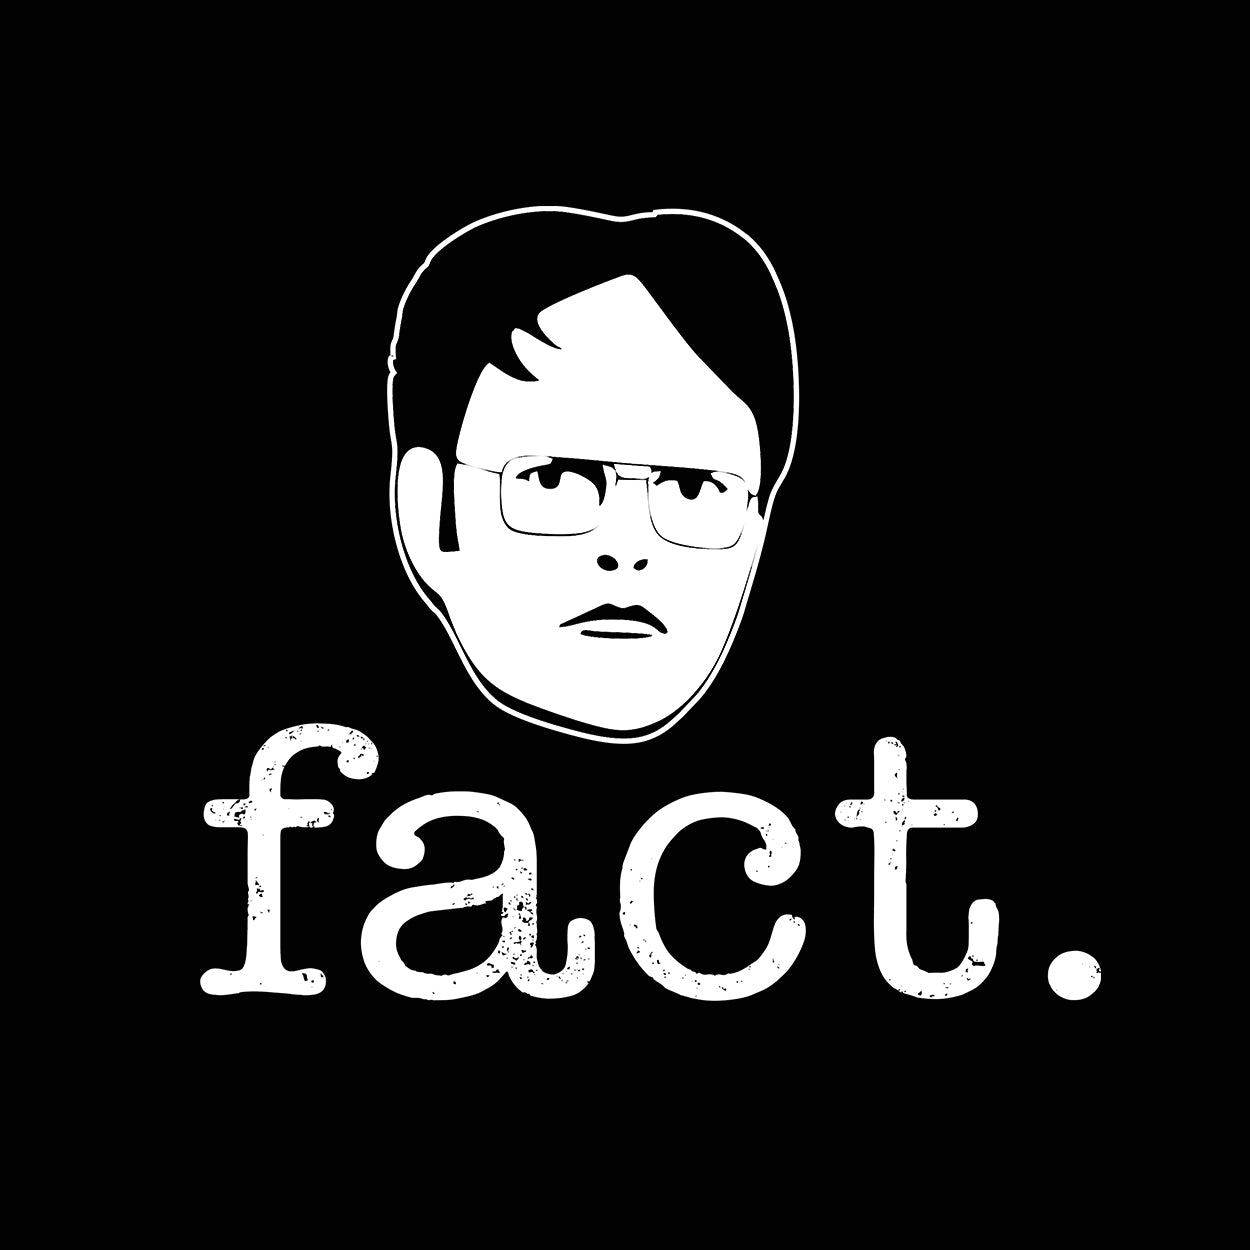 Fact - Dwight Schrute Tshirt - Donkey Tees